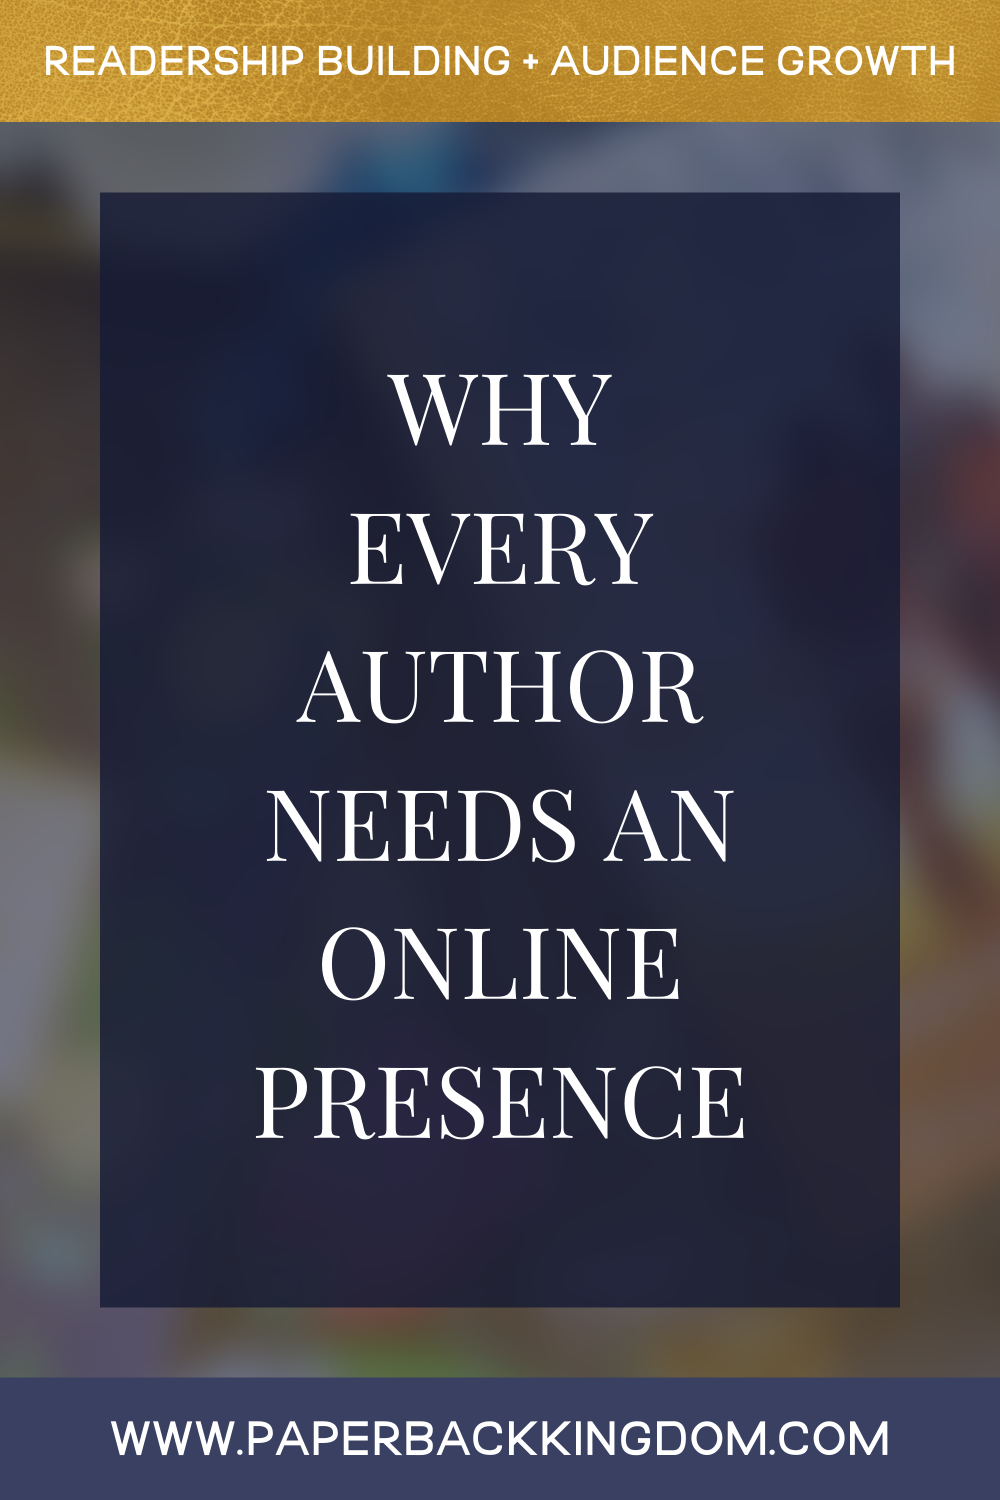 Why Every Author Needs An Online Presence - Despite what some people may think, being an author does not guarantee bestselling books and a consistent, wealthy payout of royalties. So as much as we'd all love to jet off overseas and do book tours, it's a little unrealistic of a concept. But, having an online presence gives anyone in the world the opportunity to find you, follow you, and be influenced to buy your books. In this post, I'm sharing how you can start building your online presence.